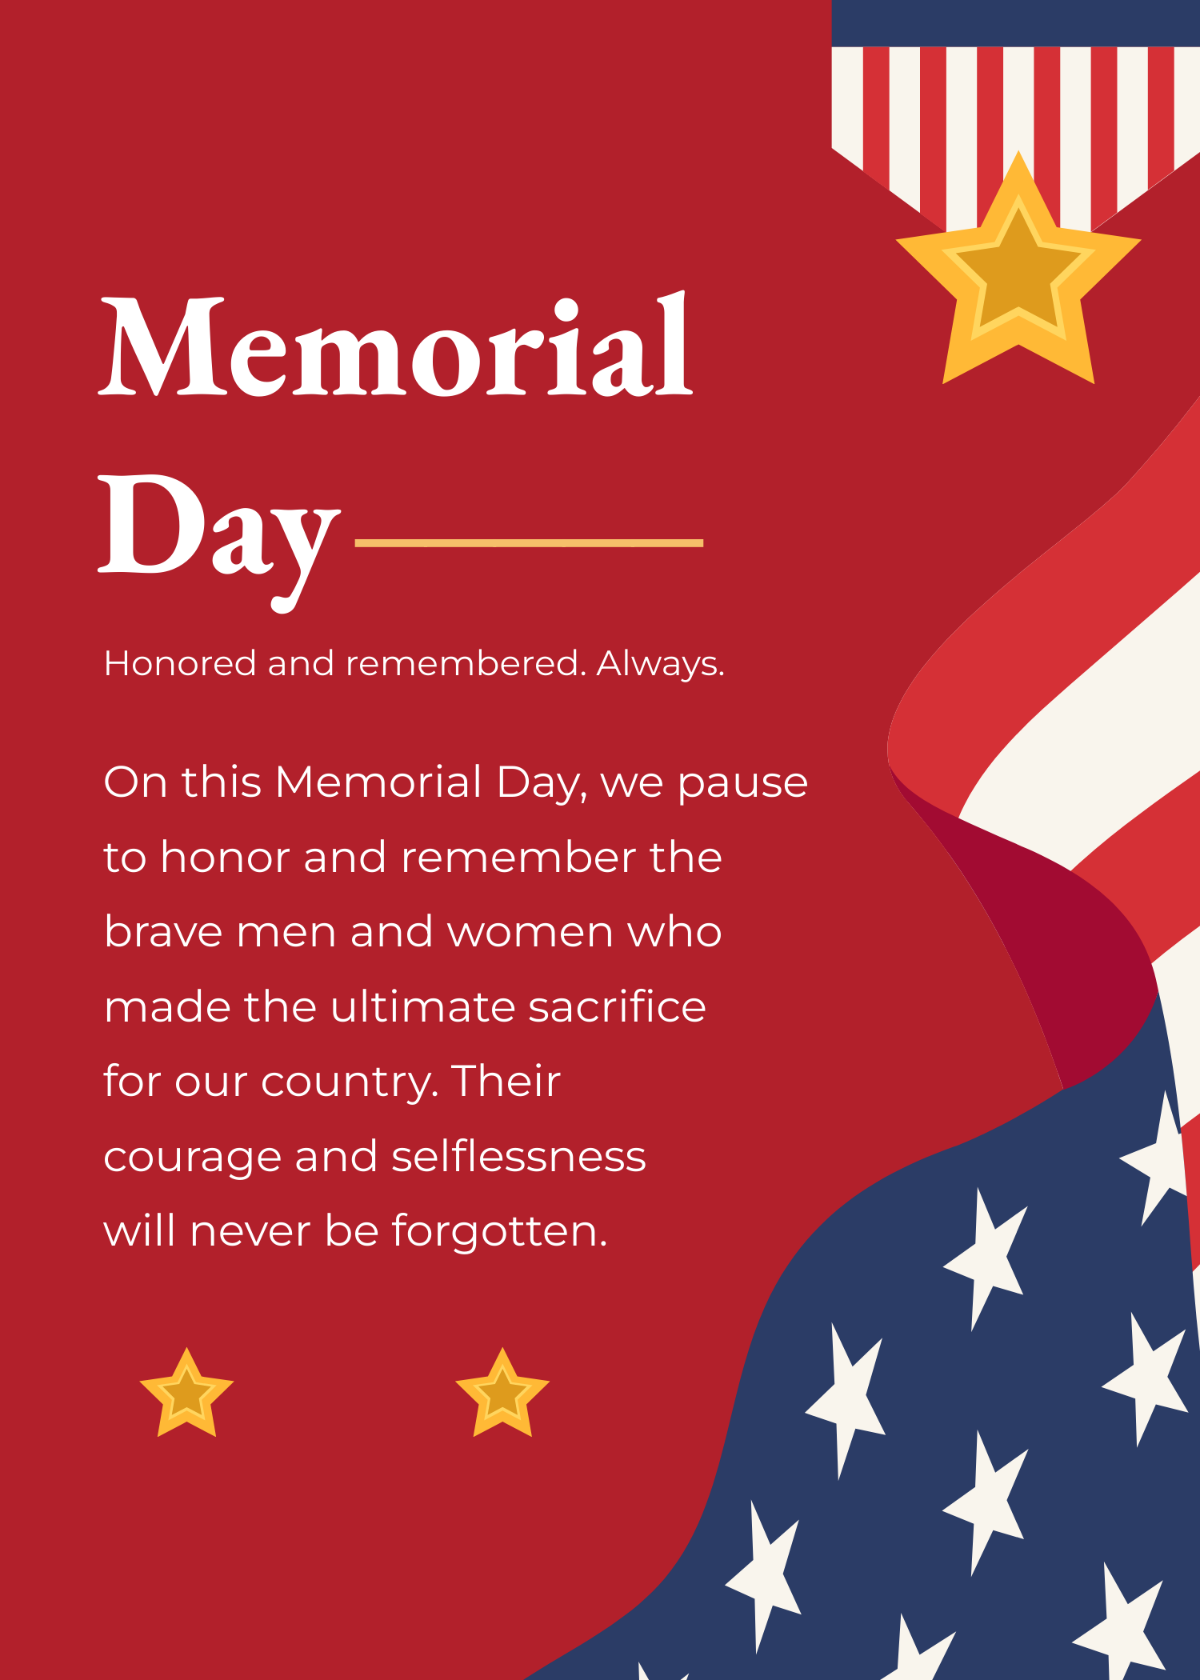 Memorial Day Observance Message